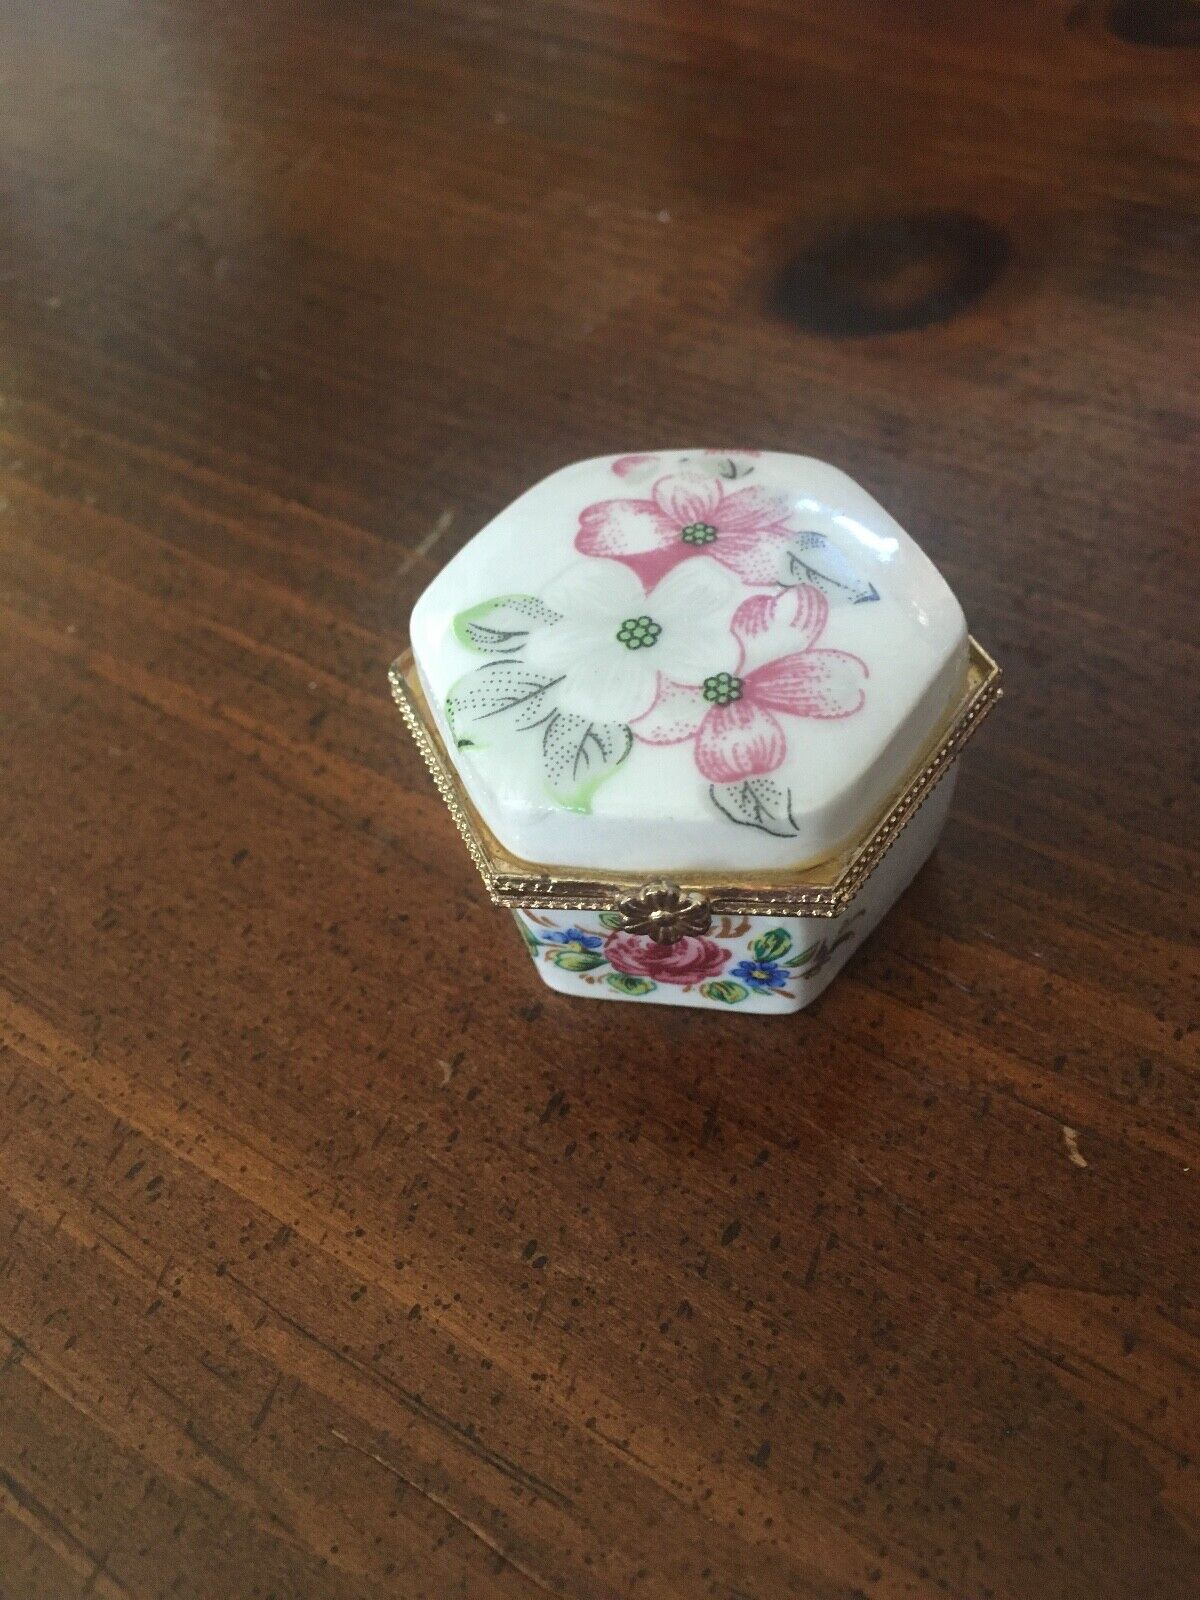 GORGEOUS Vintage Gold Tone Floral Pill Box - SIX SIDED